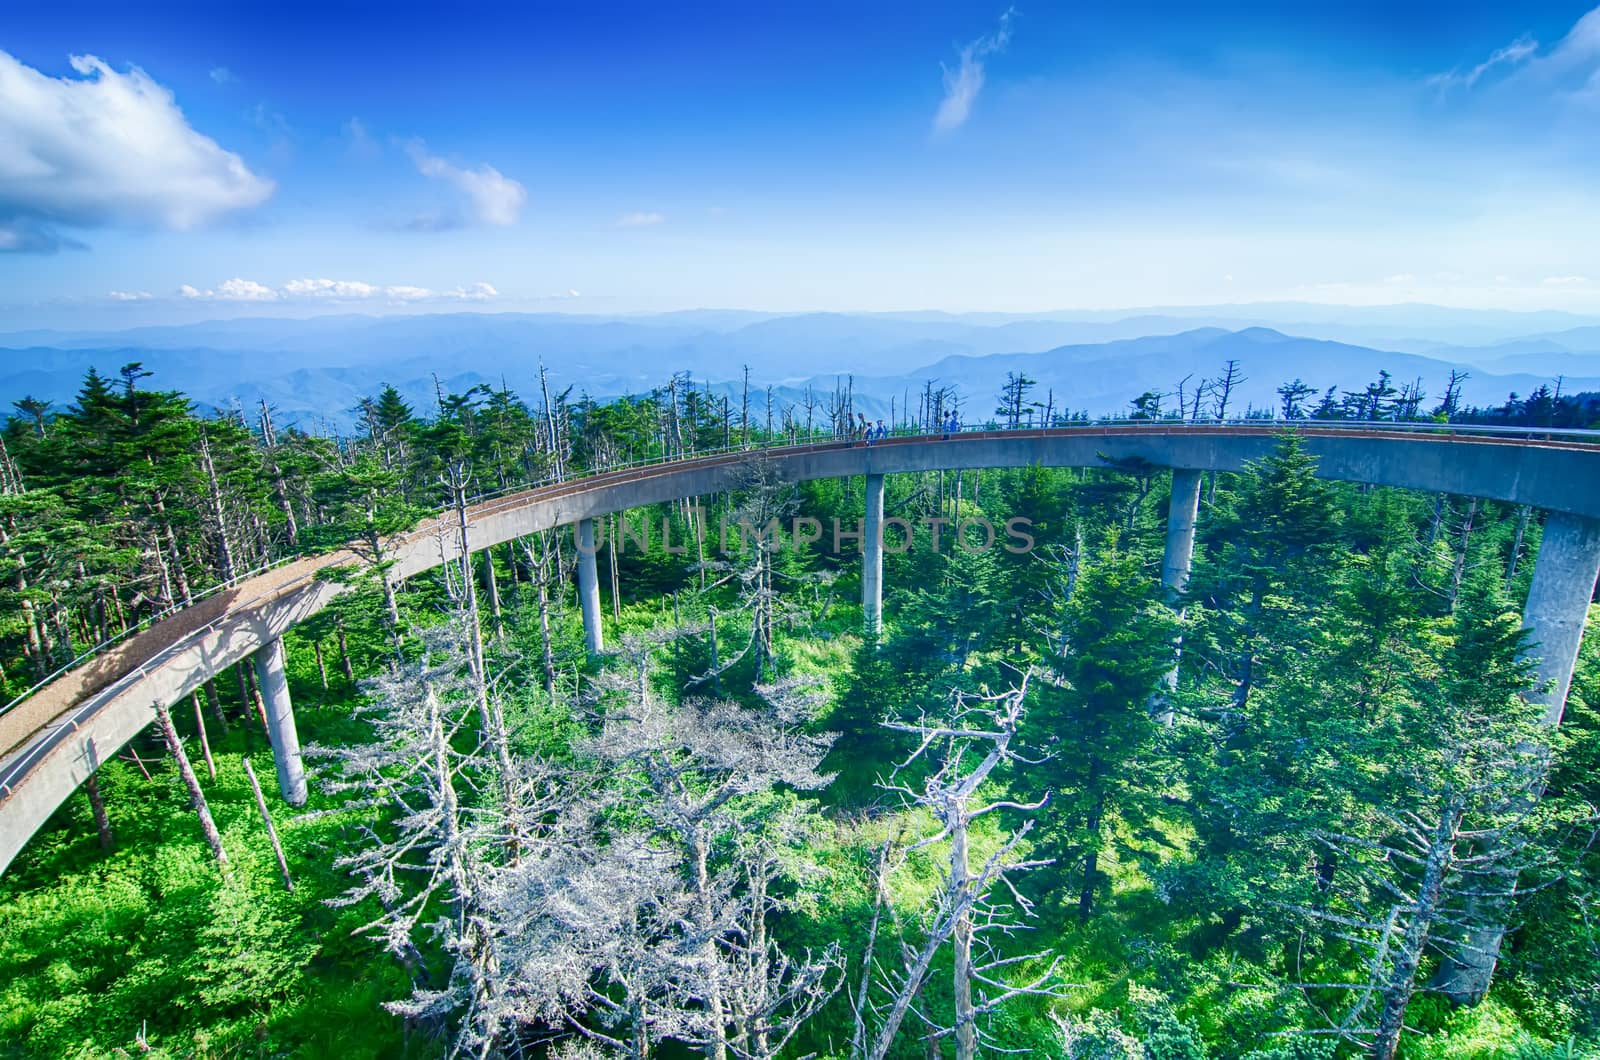 Clingmans Dome - Great Smoky Mountains National Park by digidreamgrafix